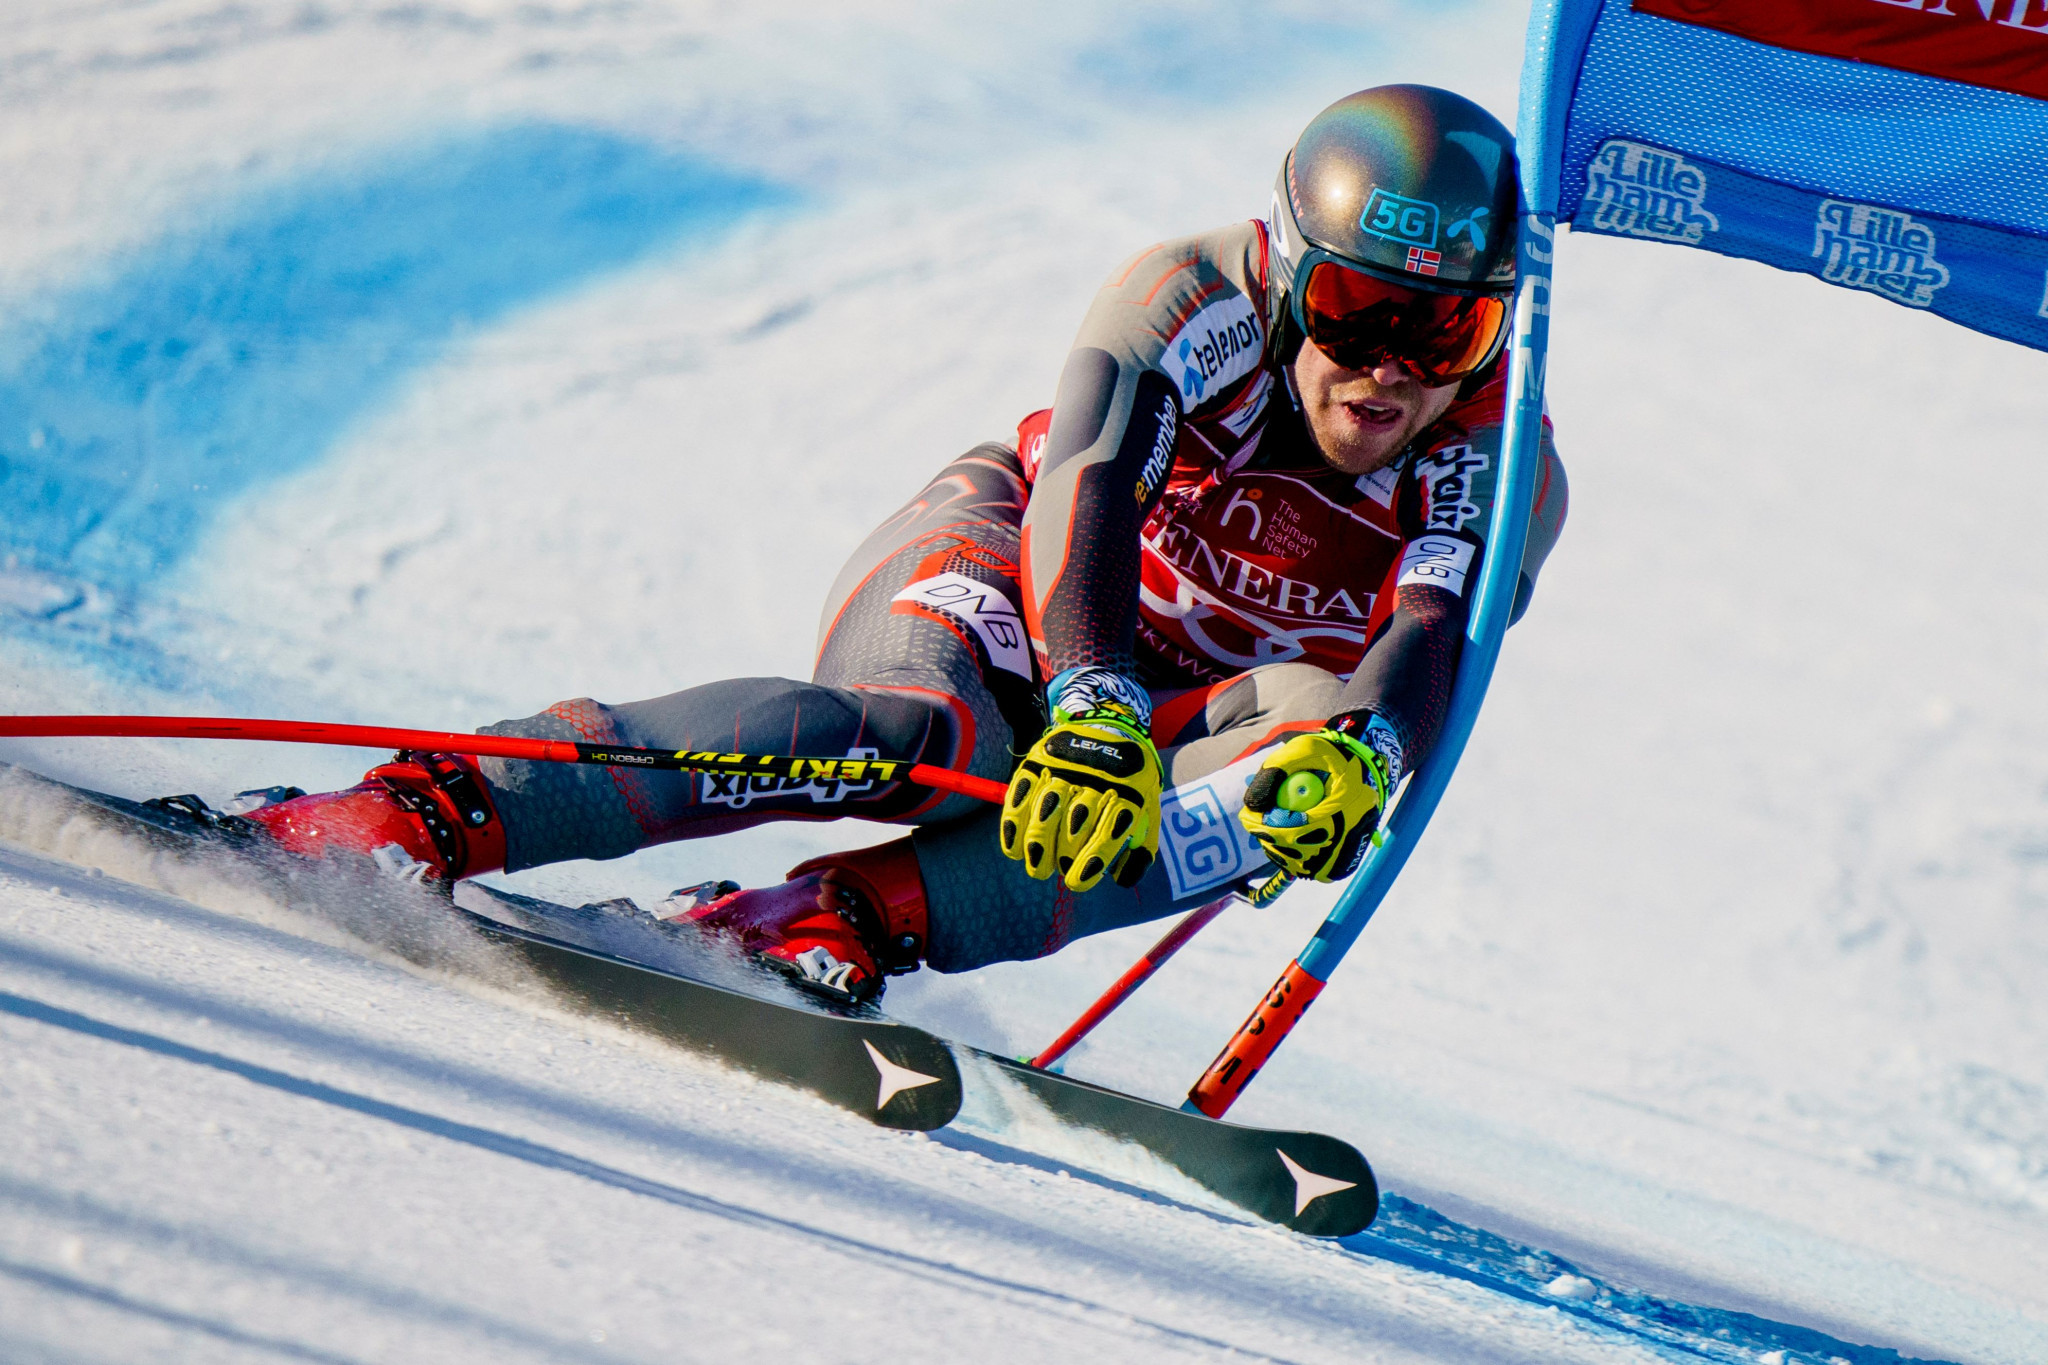 Tripleheader in Lake Louise sees Men's Alpine Ski World Cup return after long absence